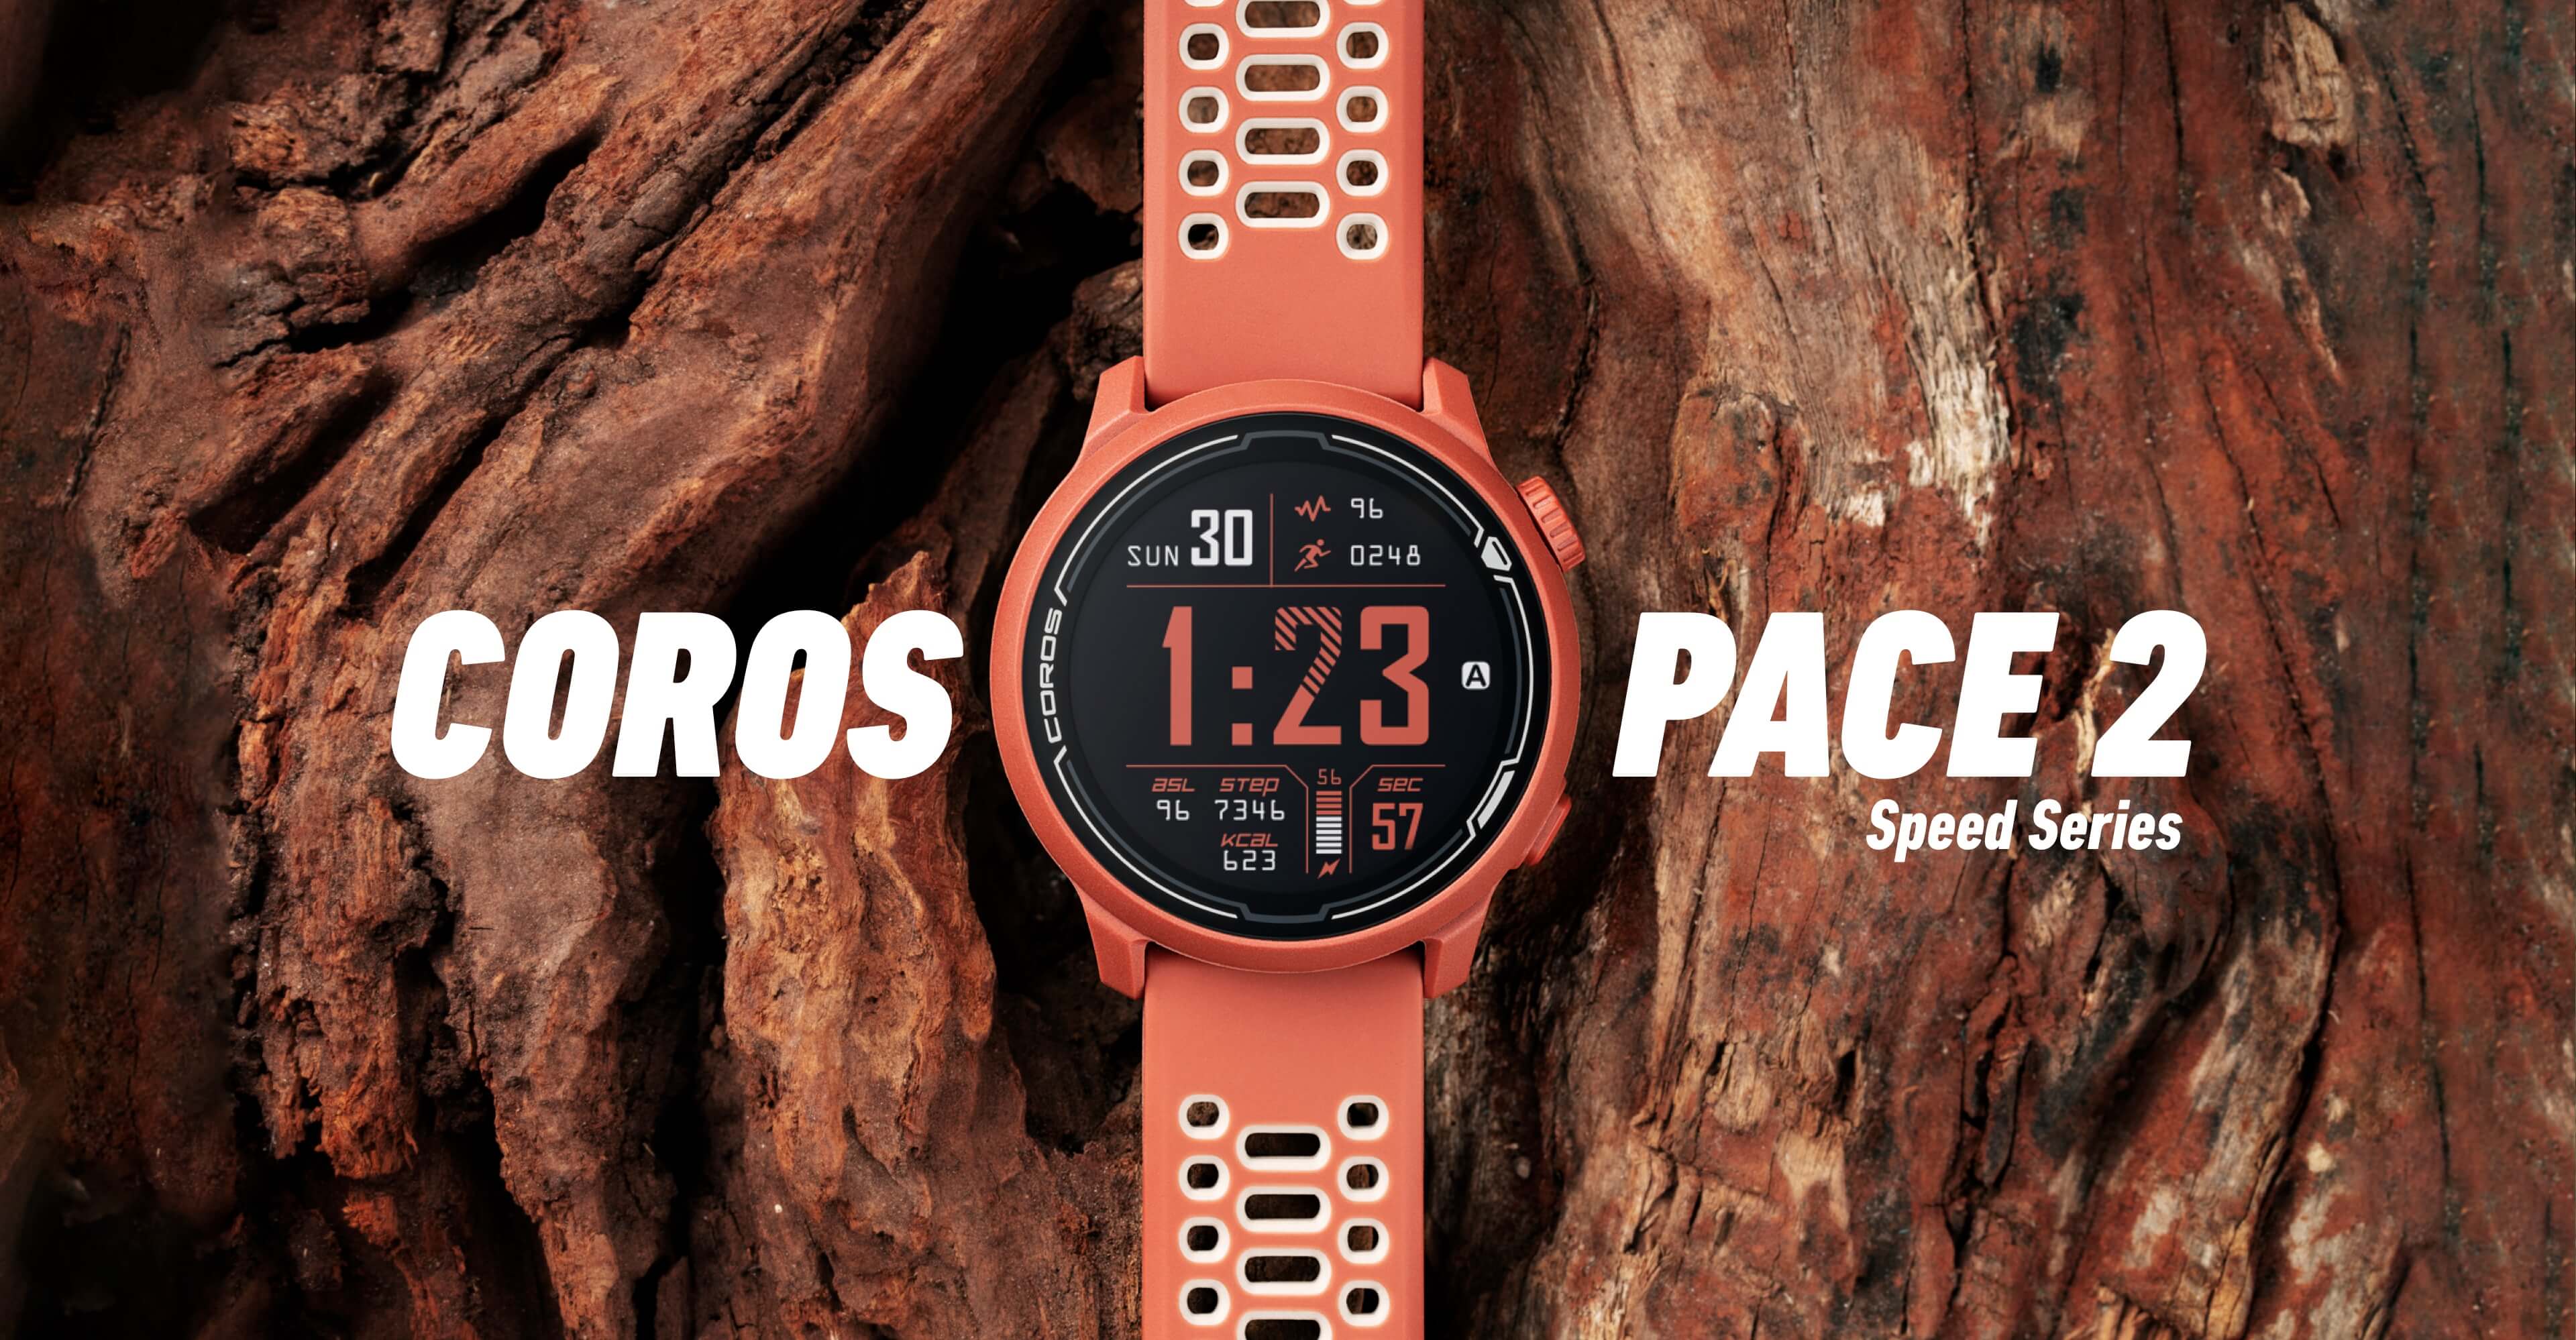 COROS - PACE 2 Speed Series Seasonal Color: Track Red.